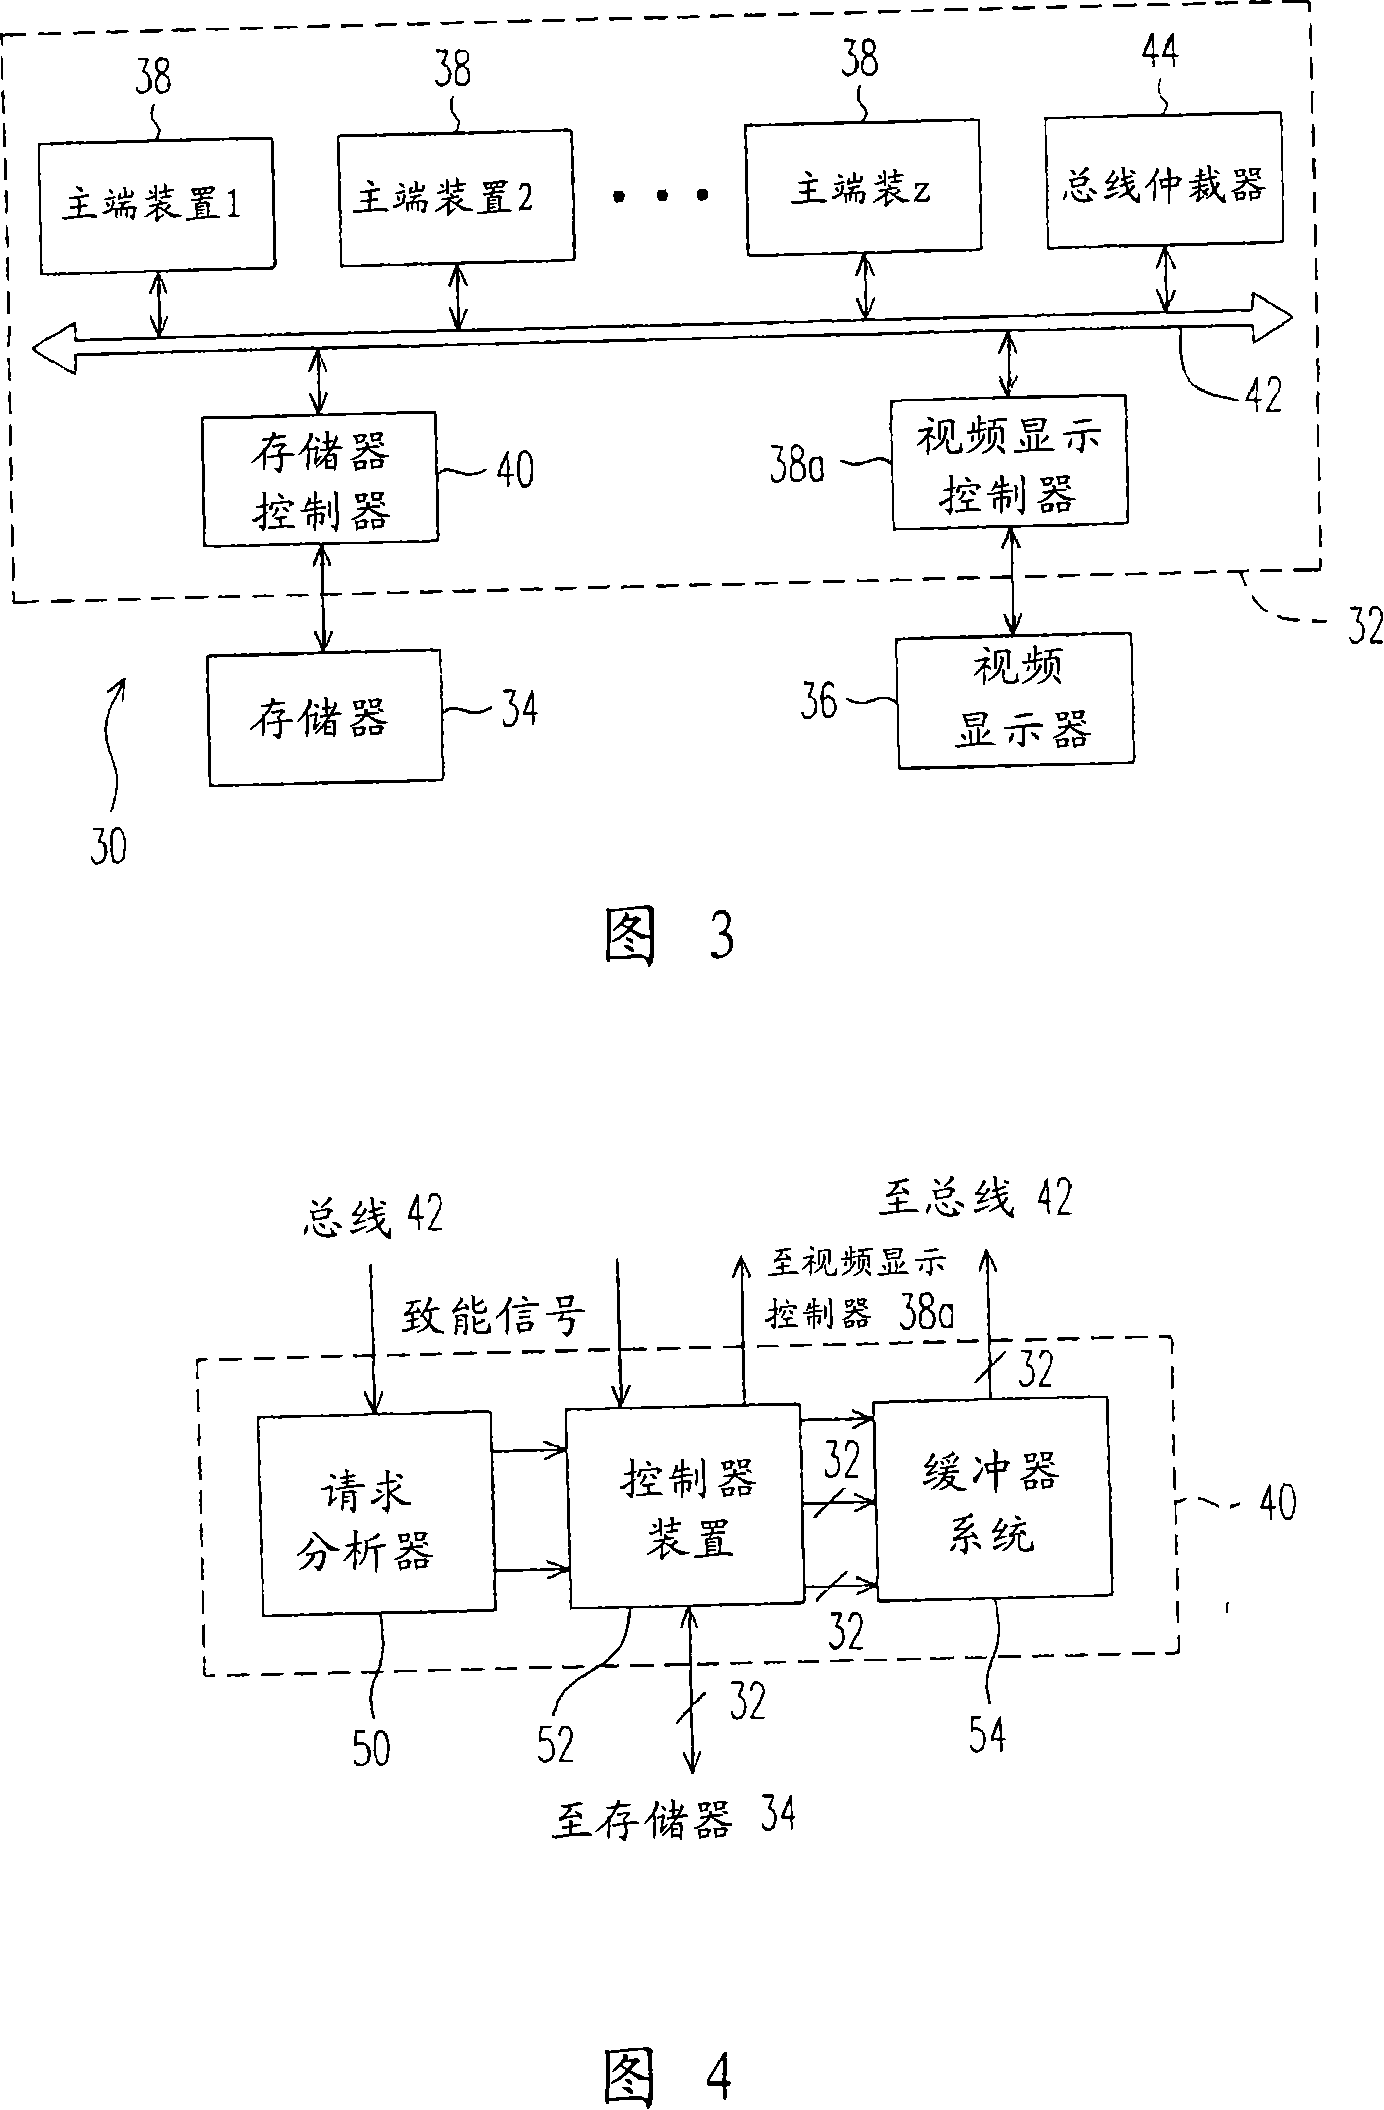 Video data package method and system